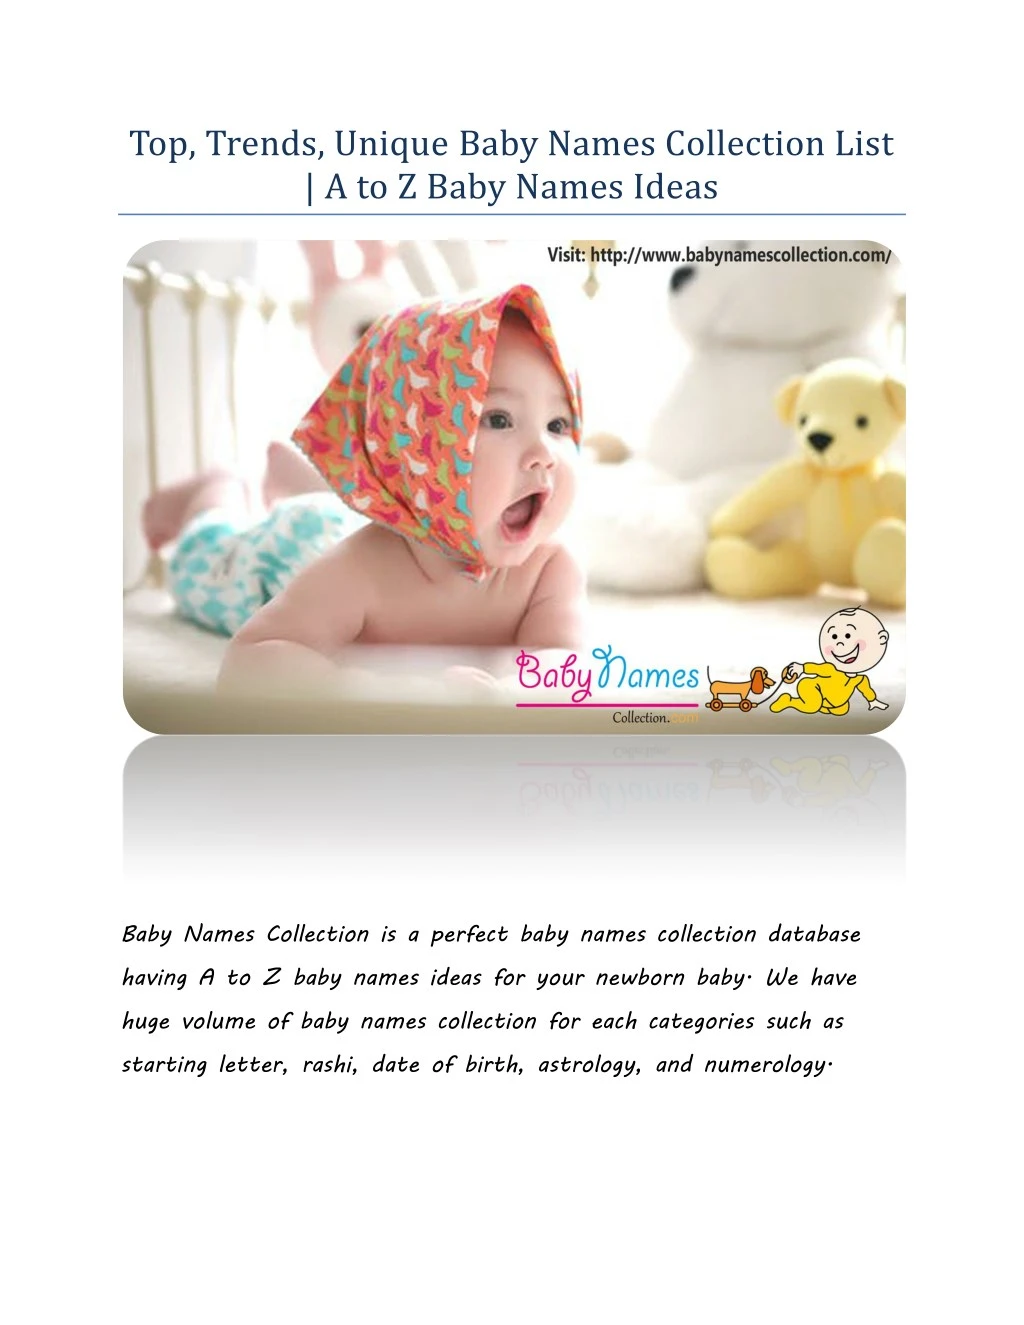 top trends unique baby names collection list